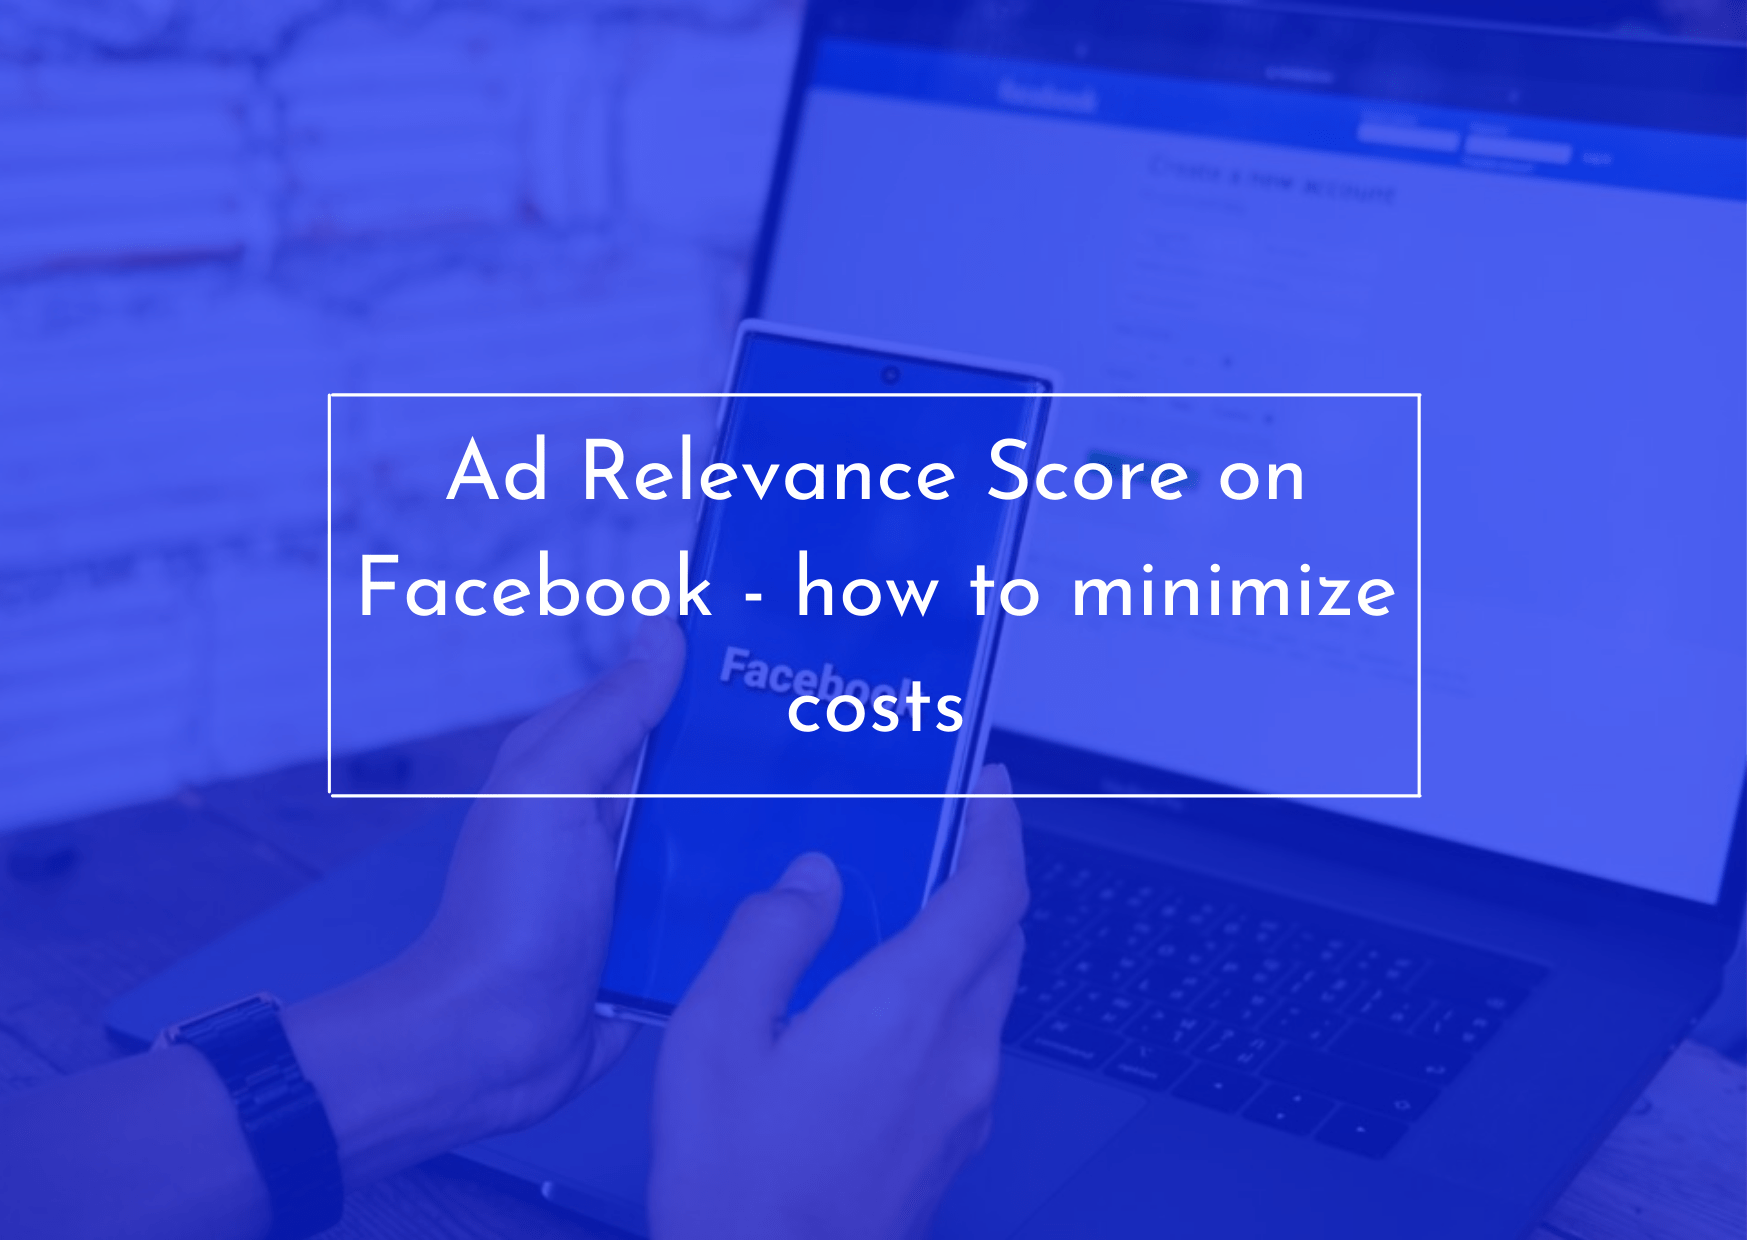 Ad Relevance Score on Facebook